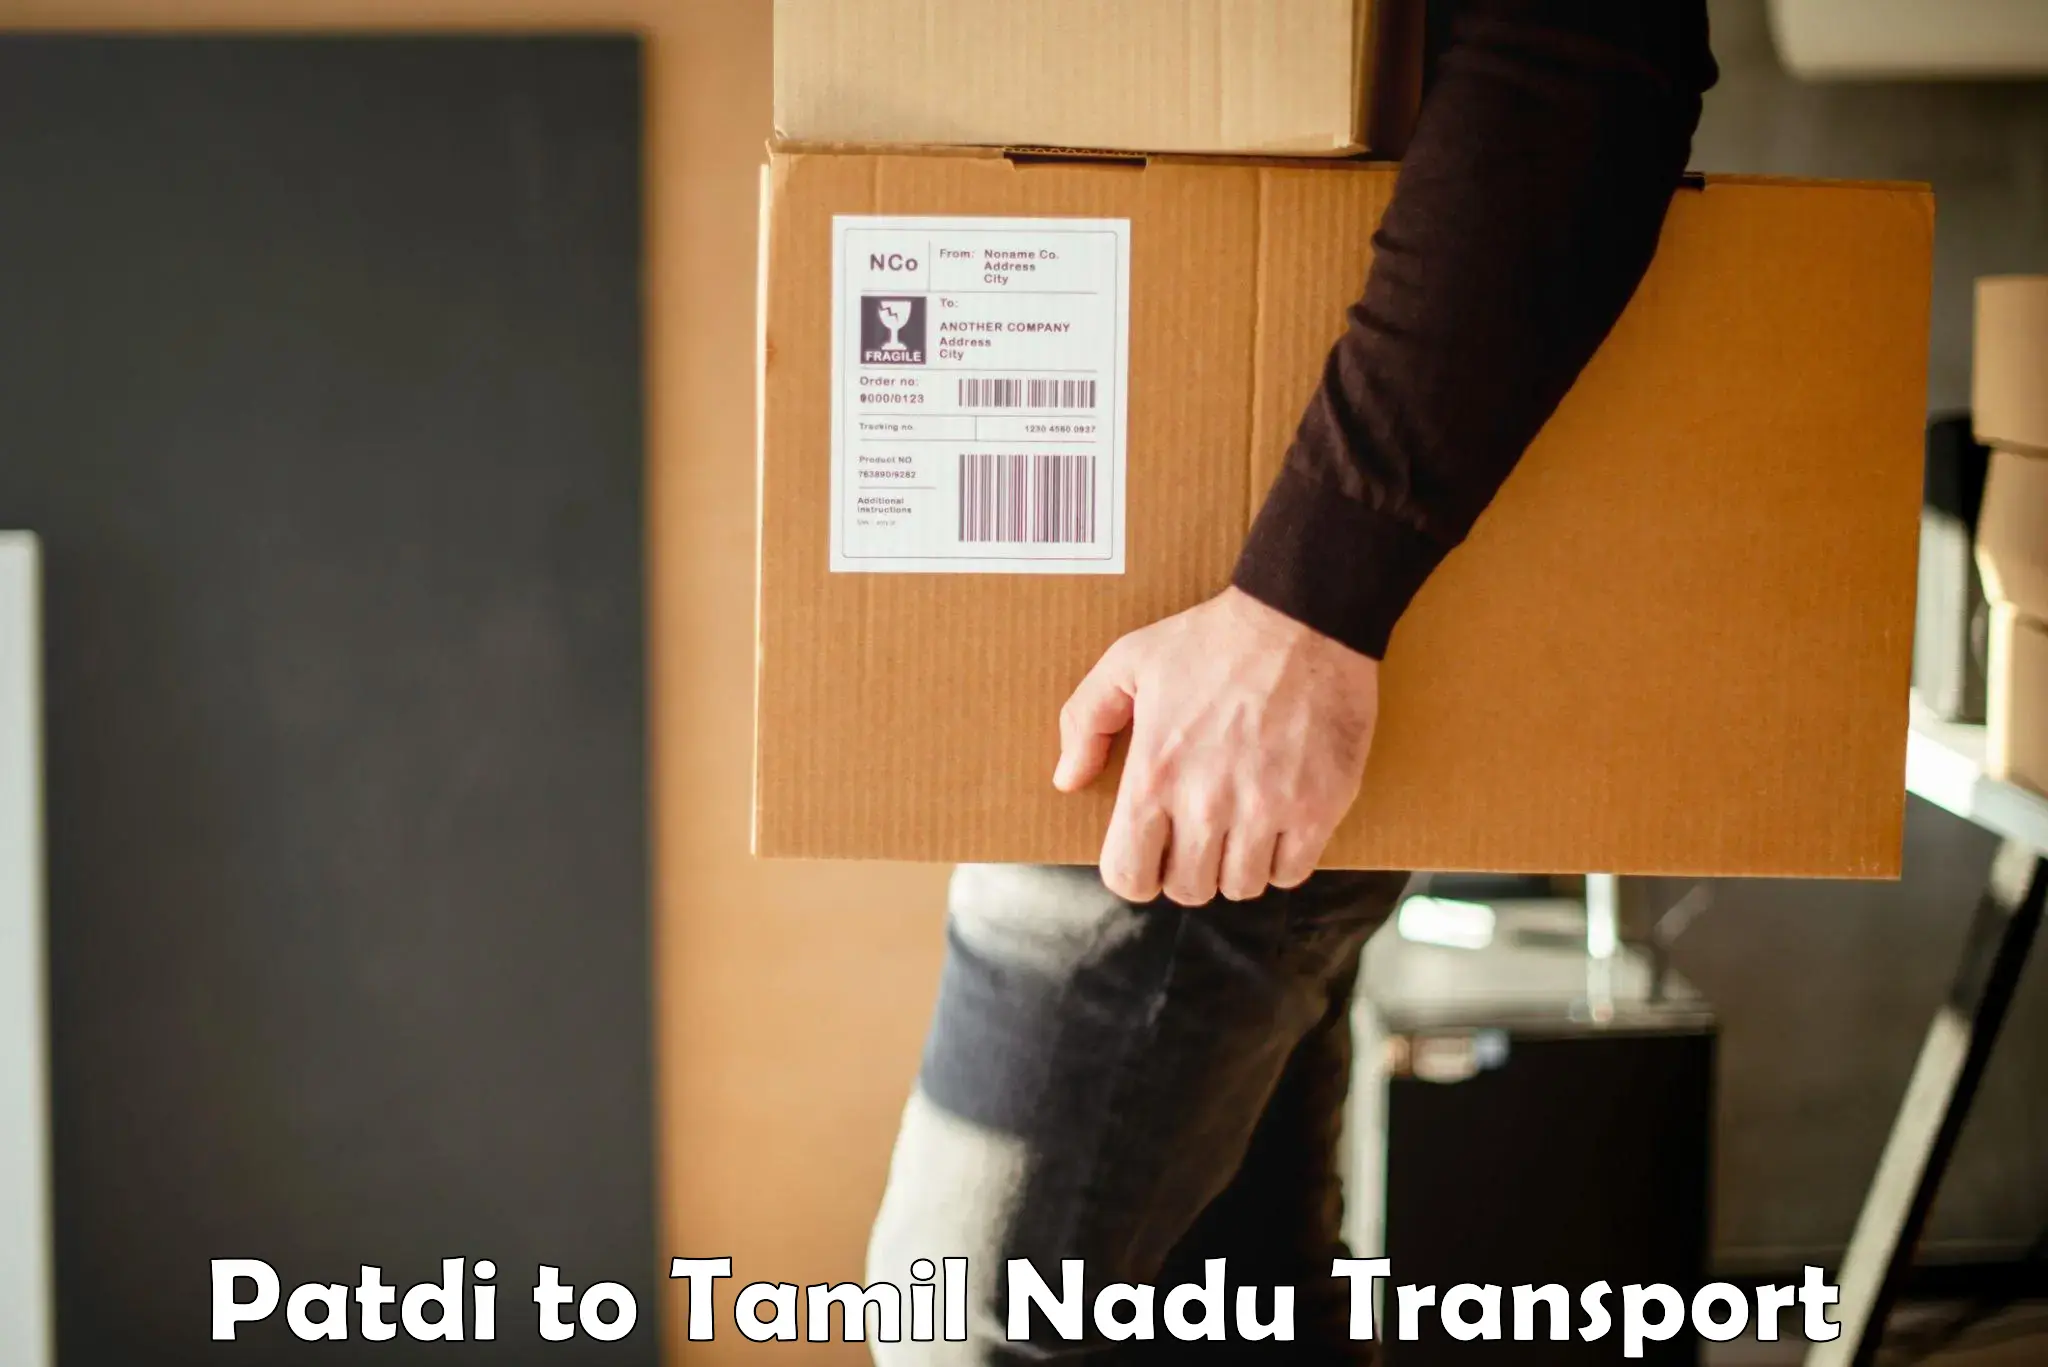 Truck transport companies in India Patdi to Shanmugha Arts Science Technology and Research Academy Thanjavur